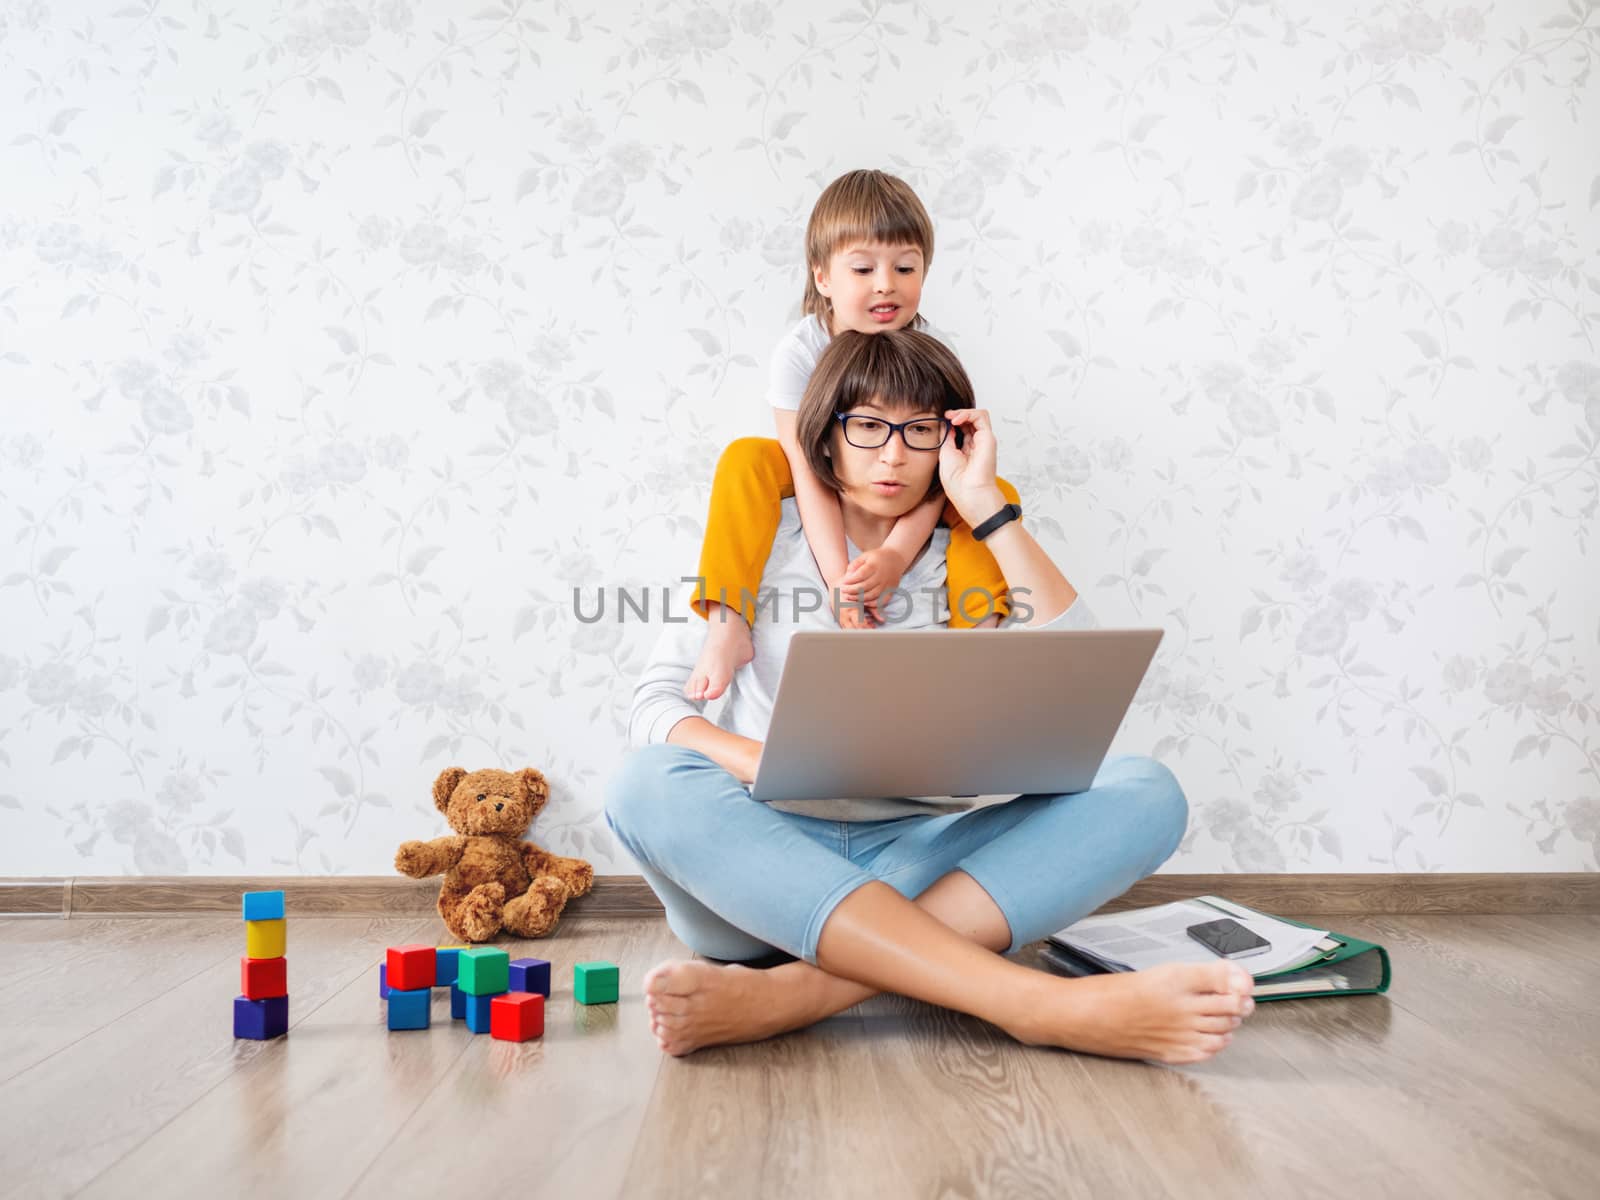 Mom and son at home. Mother works remotely with laptop, son sits by aksenovko